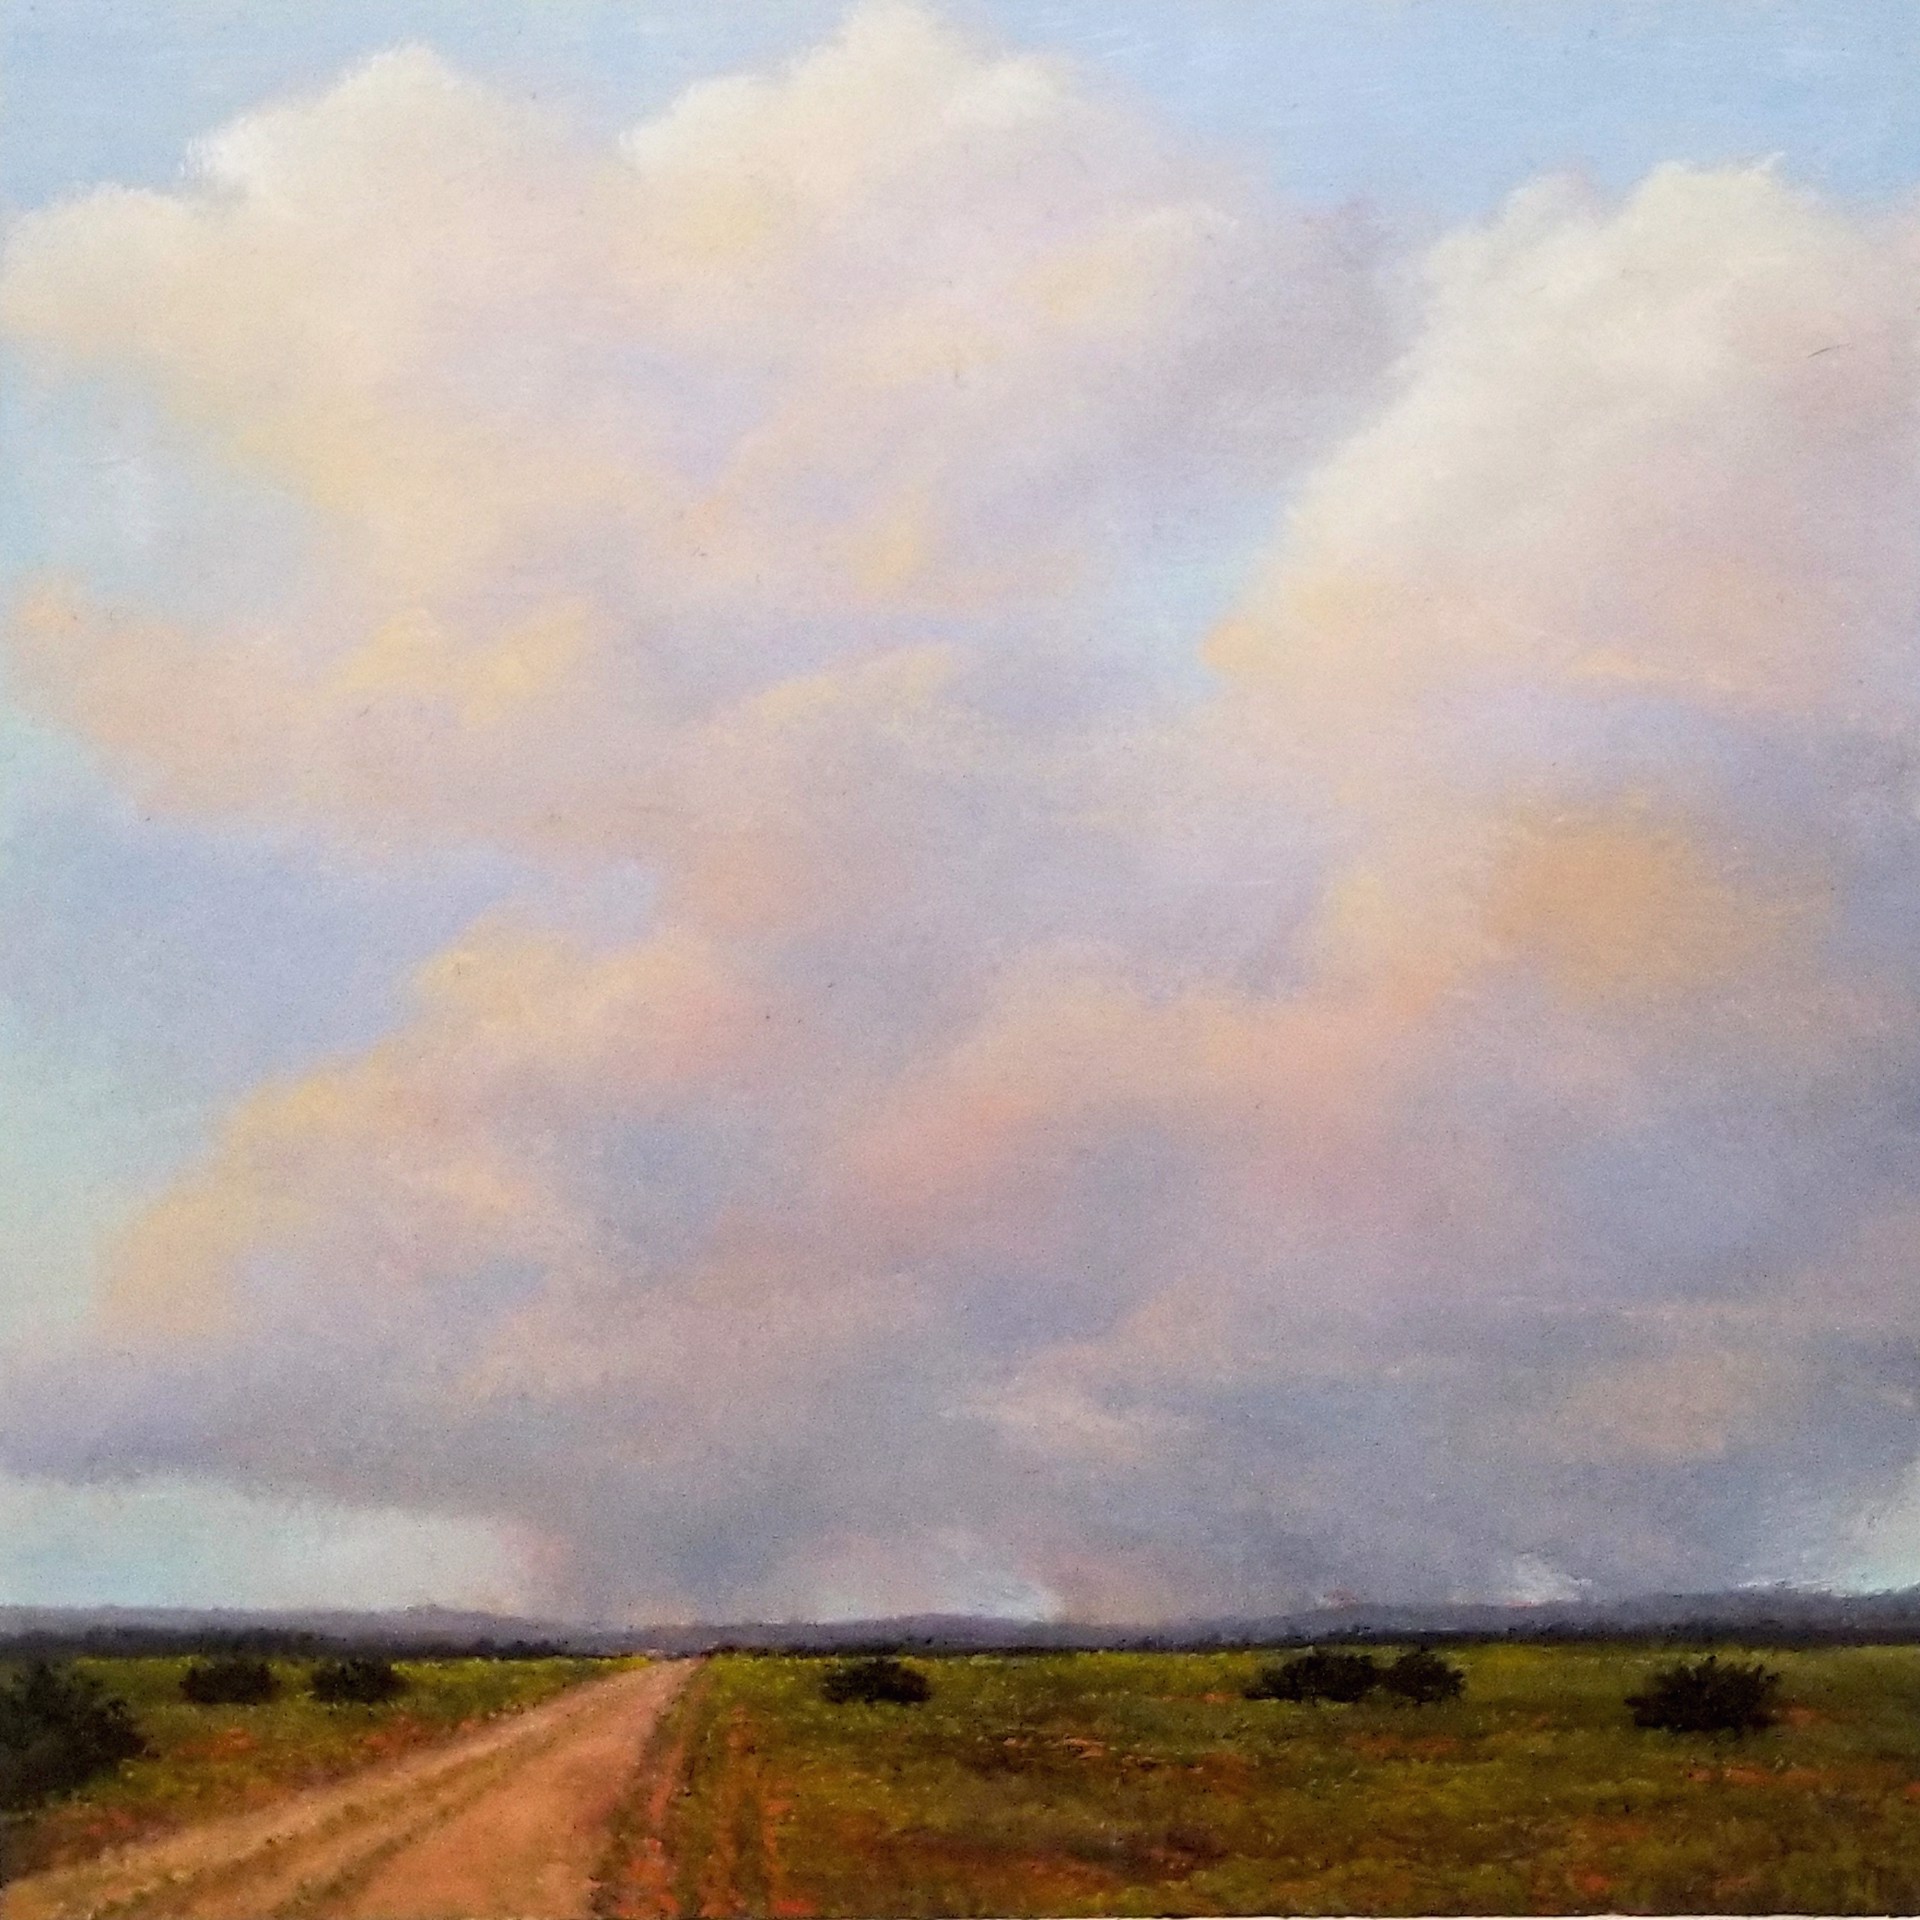 The Road & the Sky (G.O.) by Greg Skol